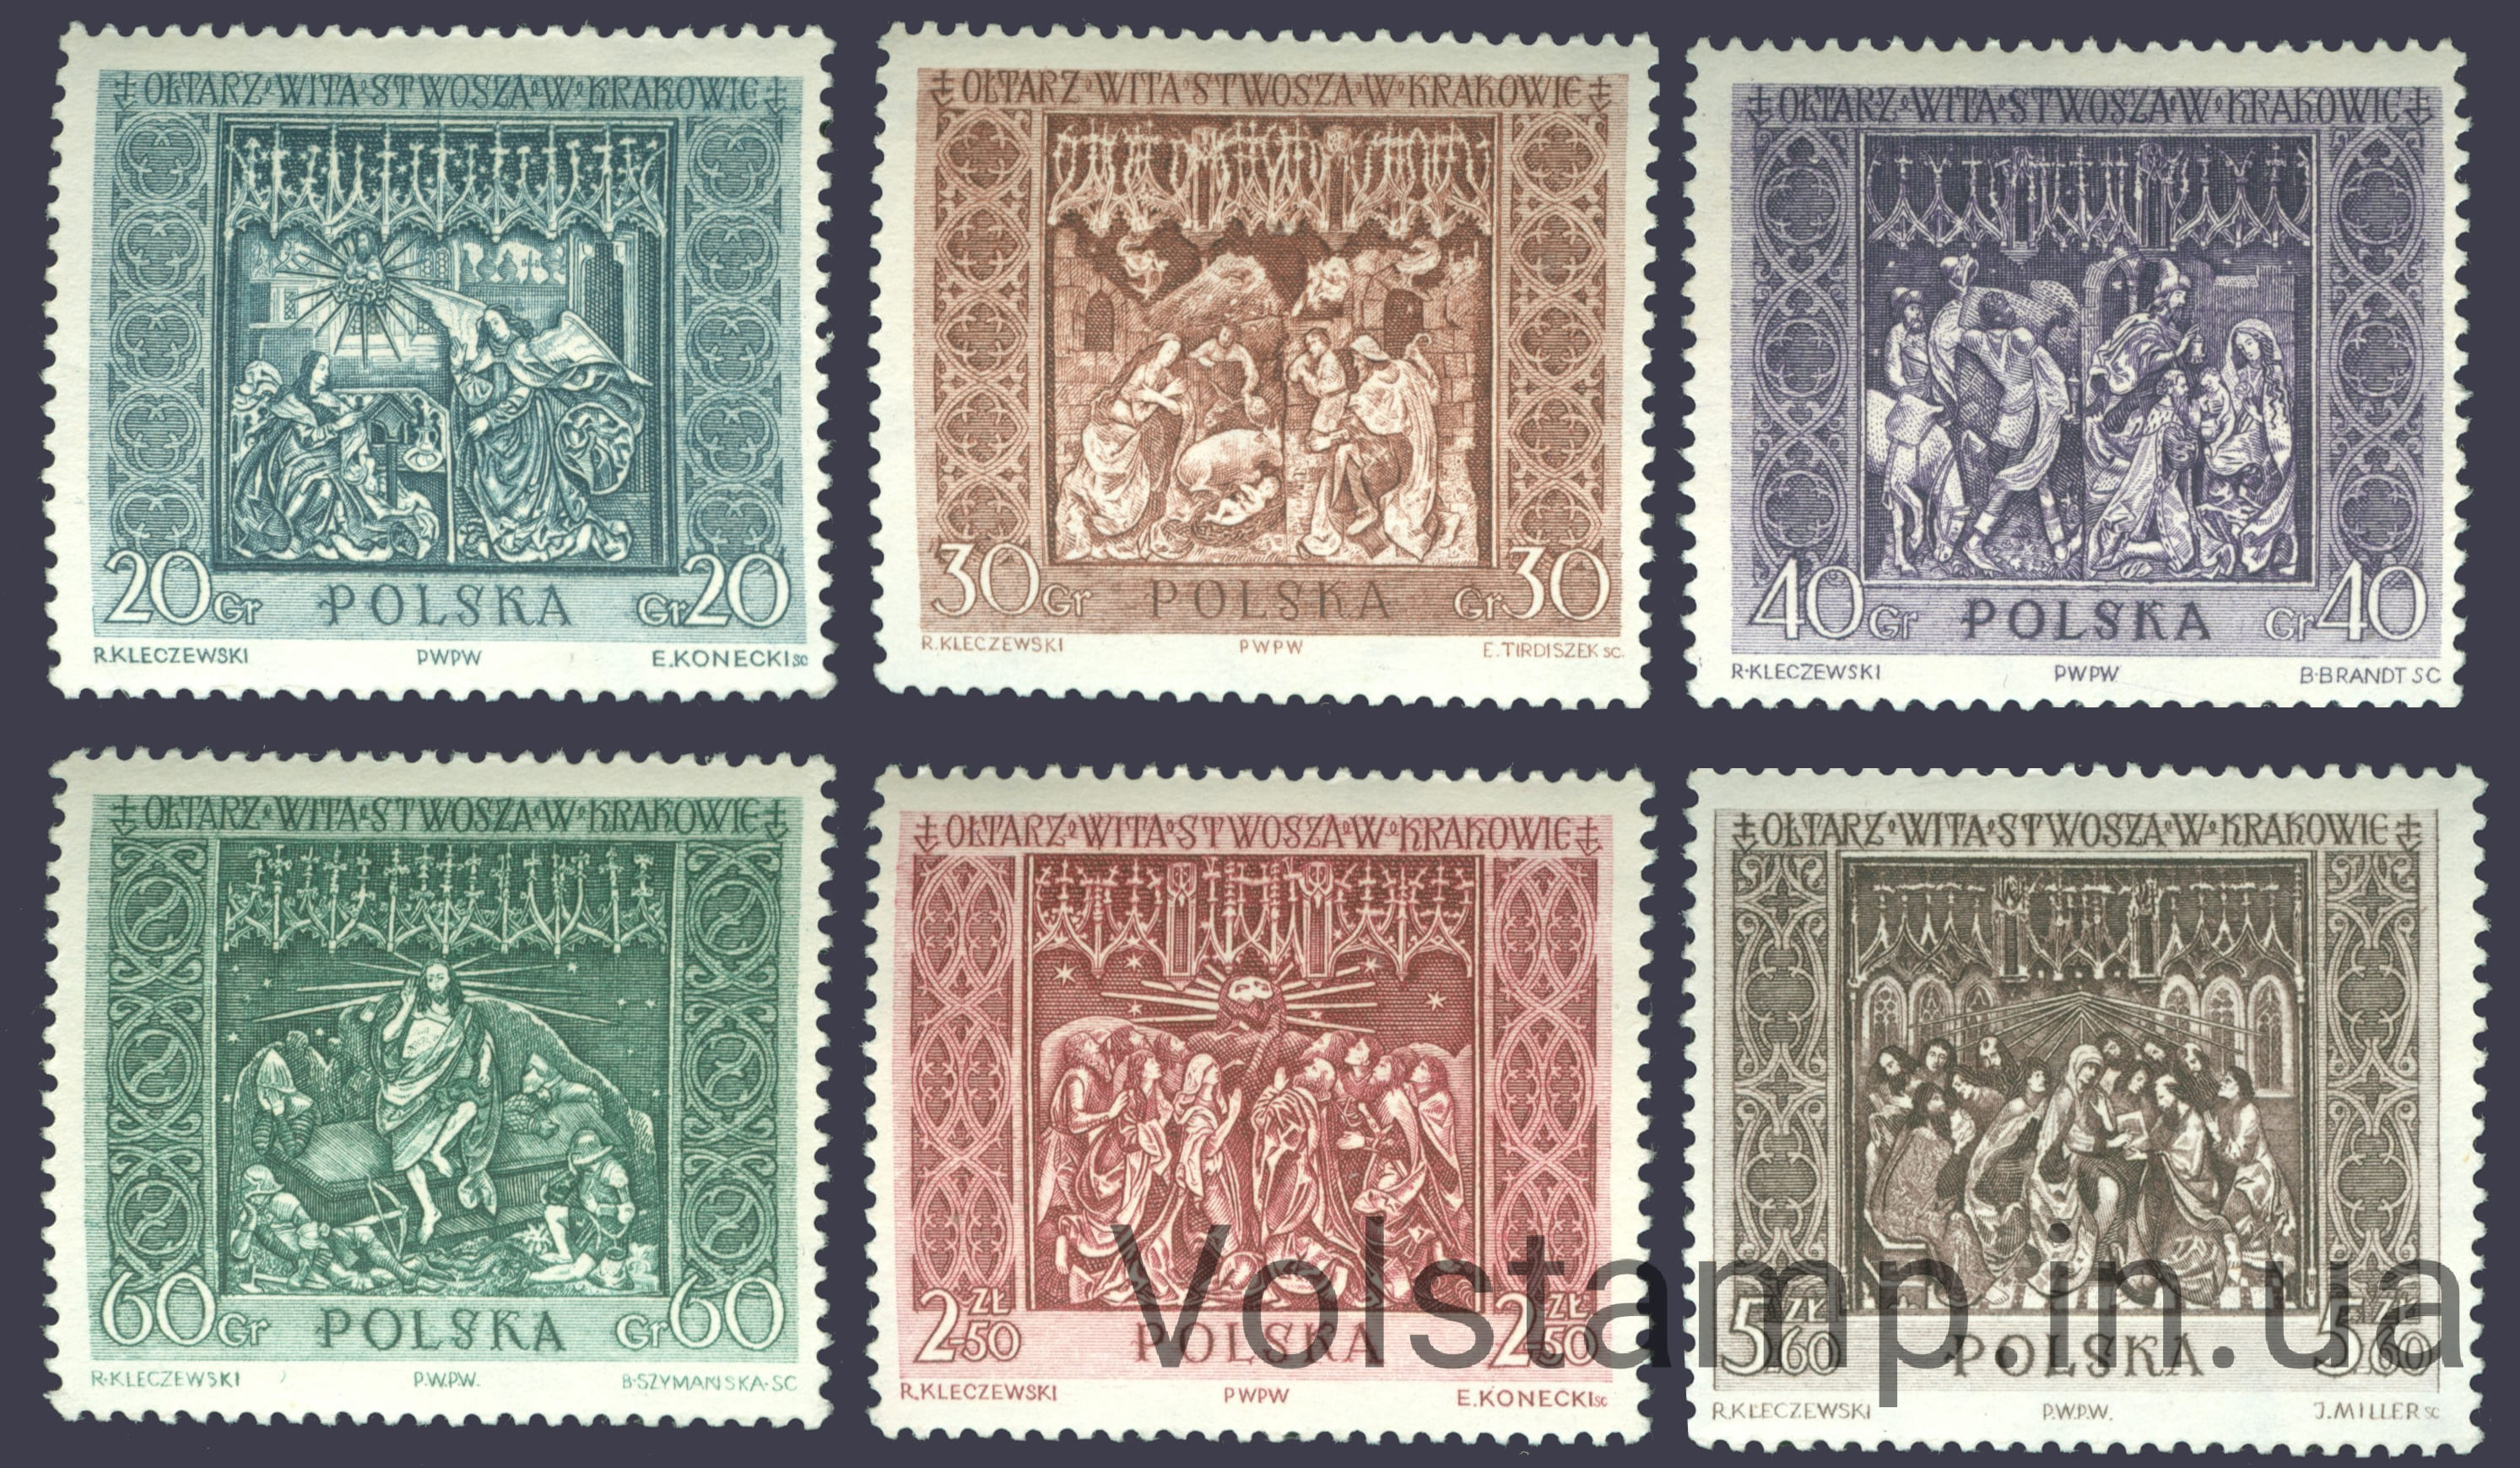 1960 Poland Series stamps (Altar Veit Stoss in the Church of St. Mary, Krakow, Painting) MNH №1179-1184